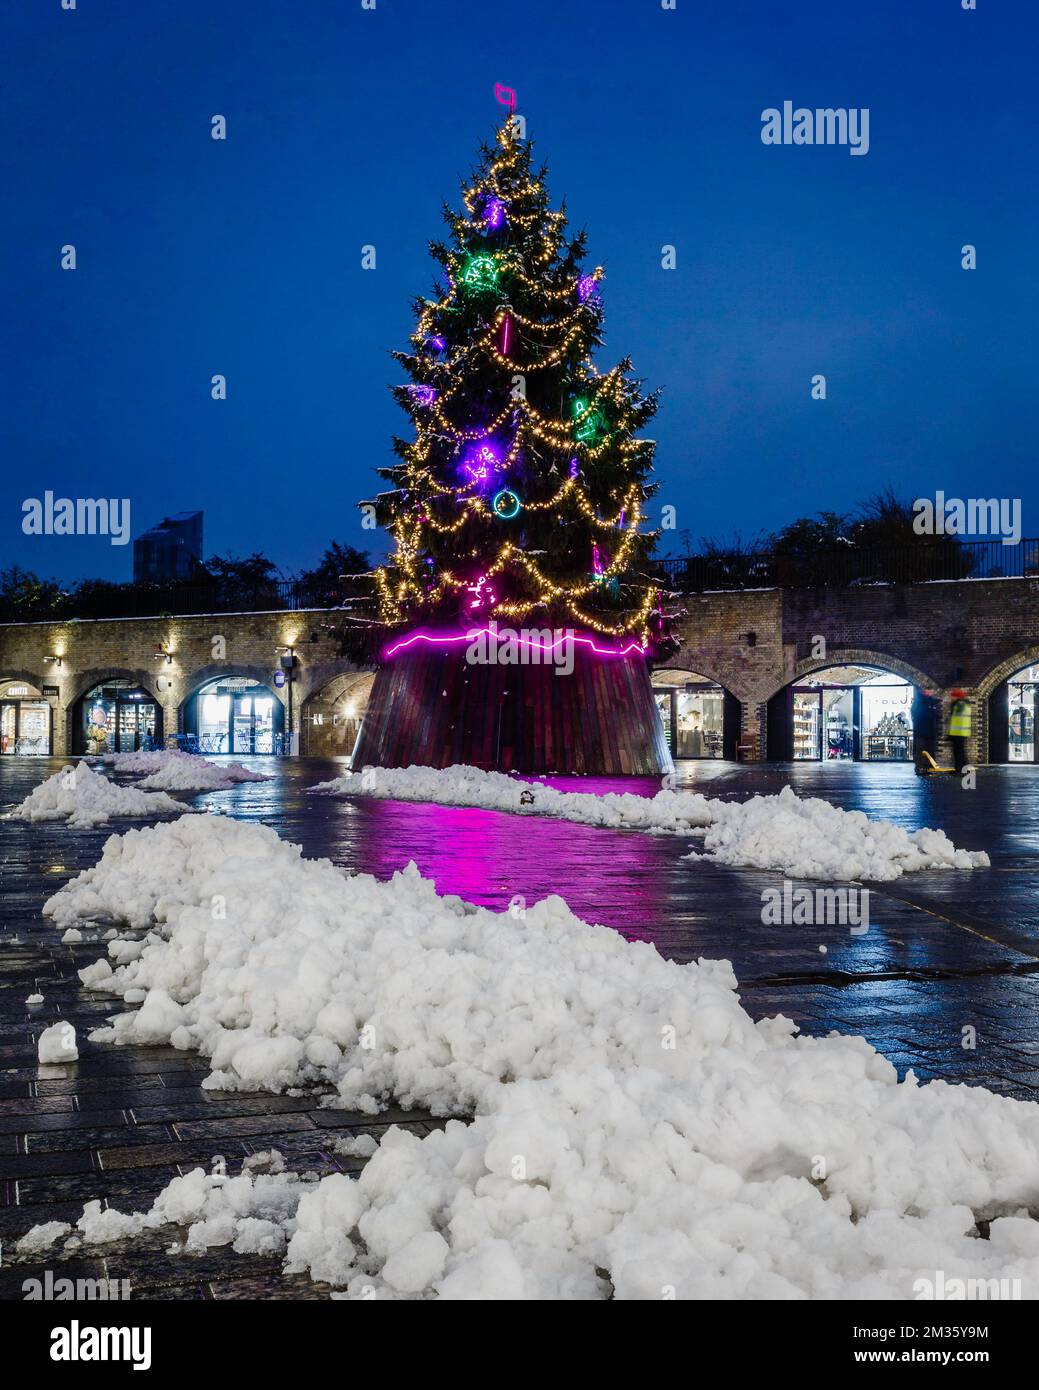 The pretty and colourful christmas tree in Coal Drops Yard in London. Stock Photo